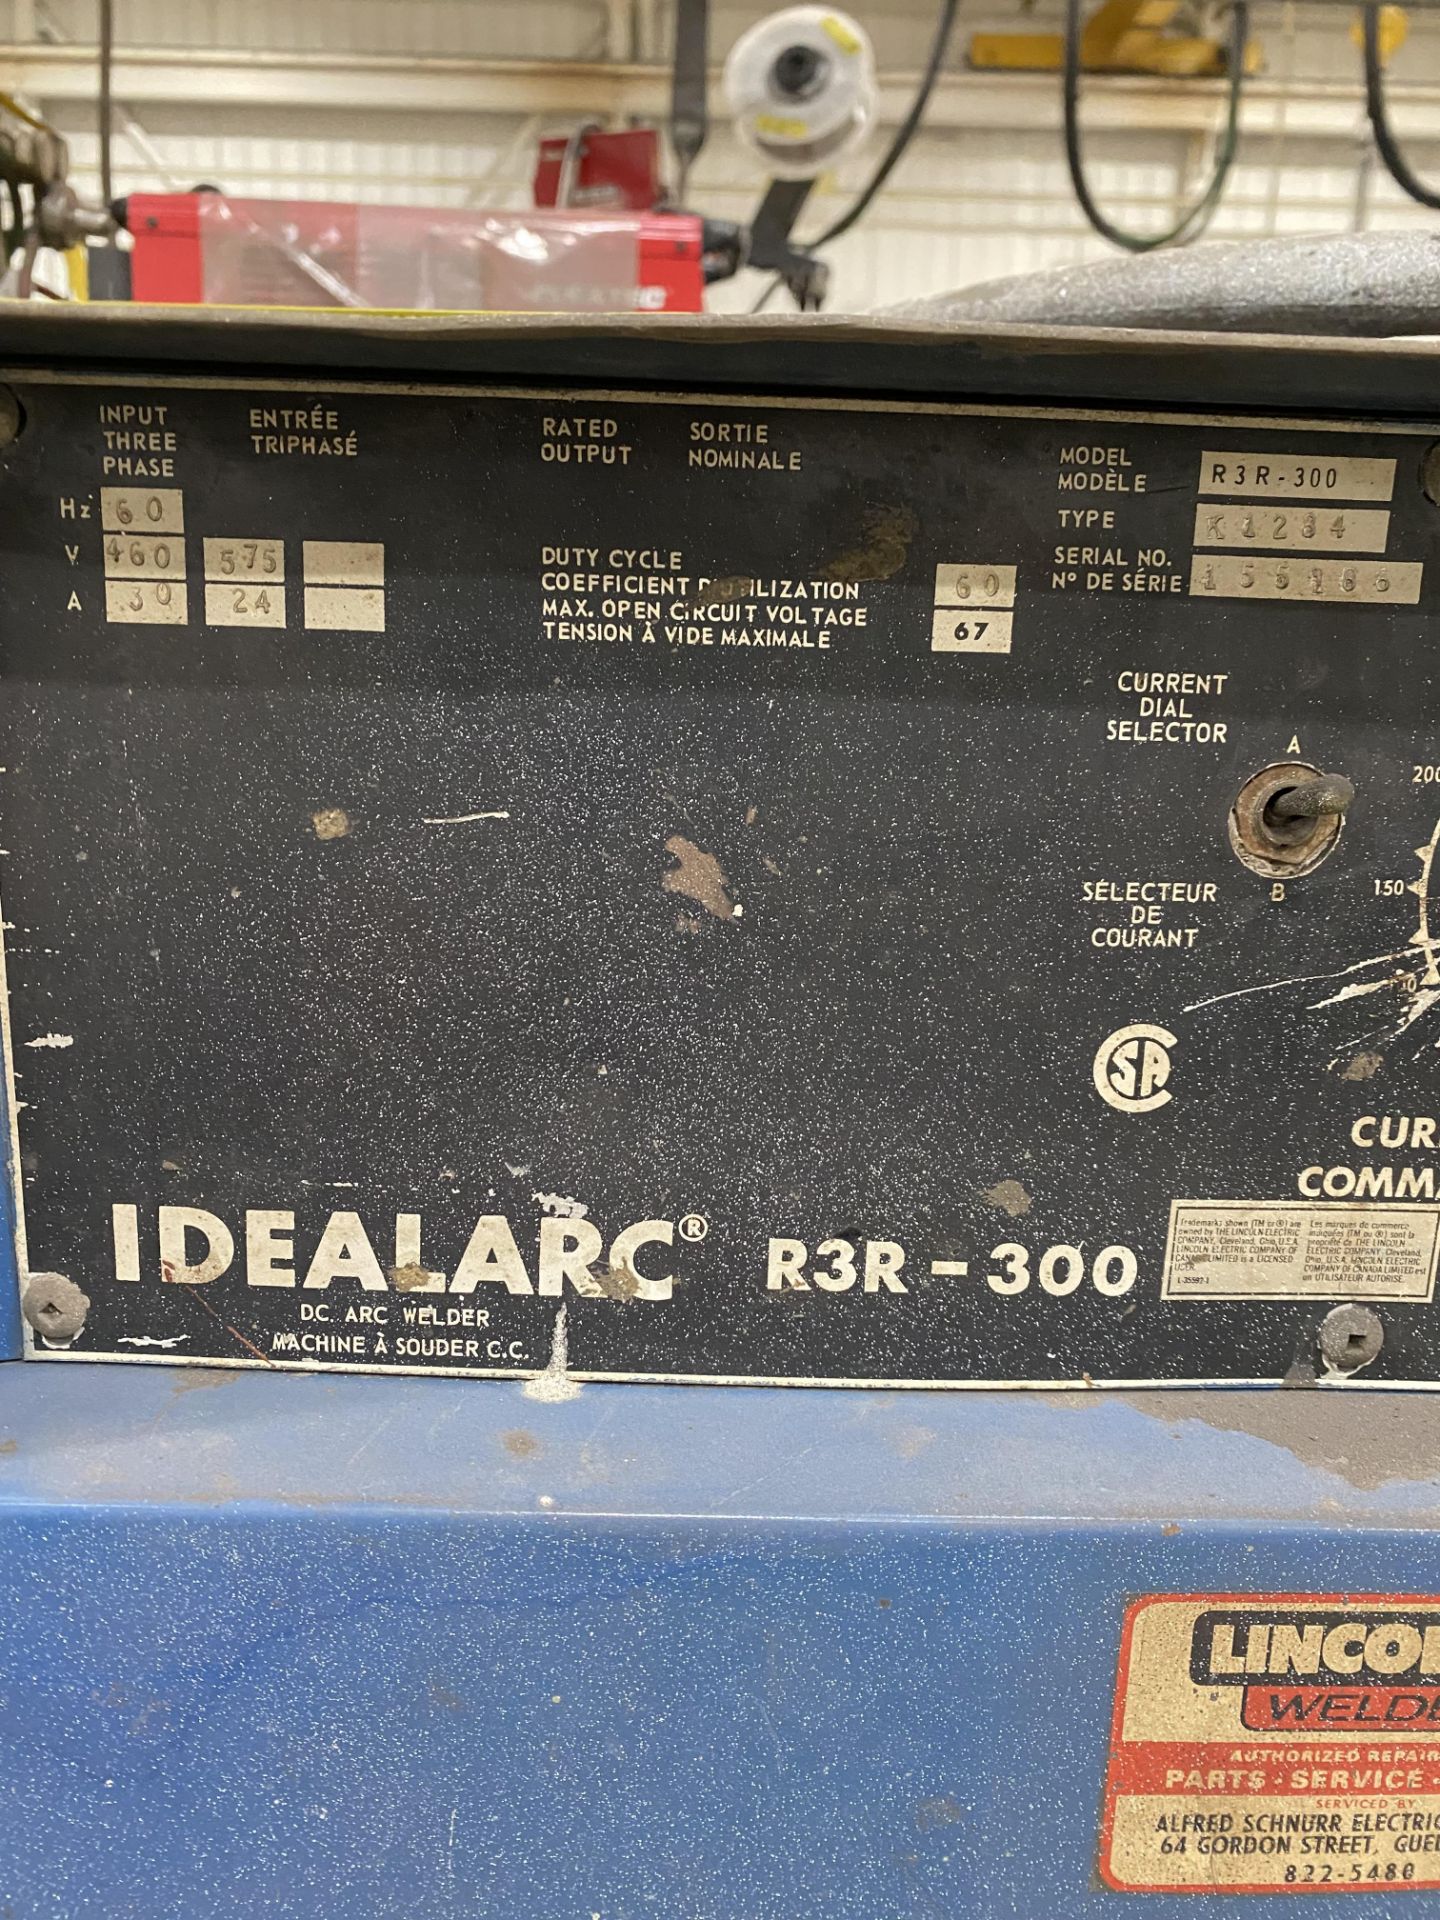 LINCOLN ELECTRIC R3R-300 DC ARC WELDER W/ CART - Image 3 of 4